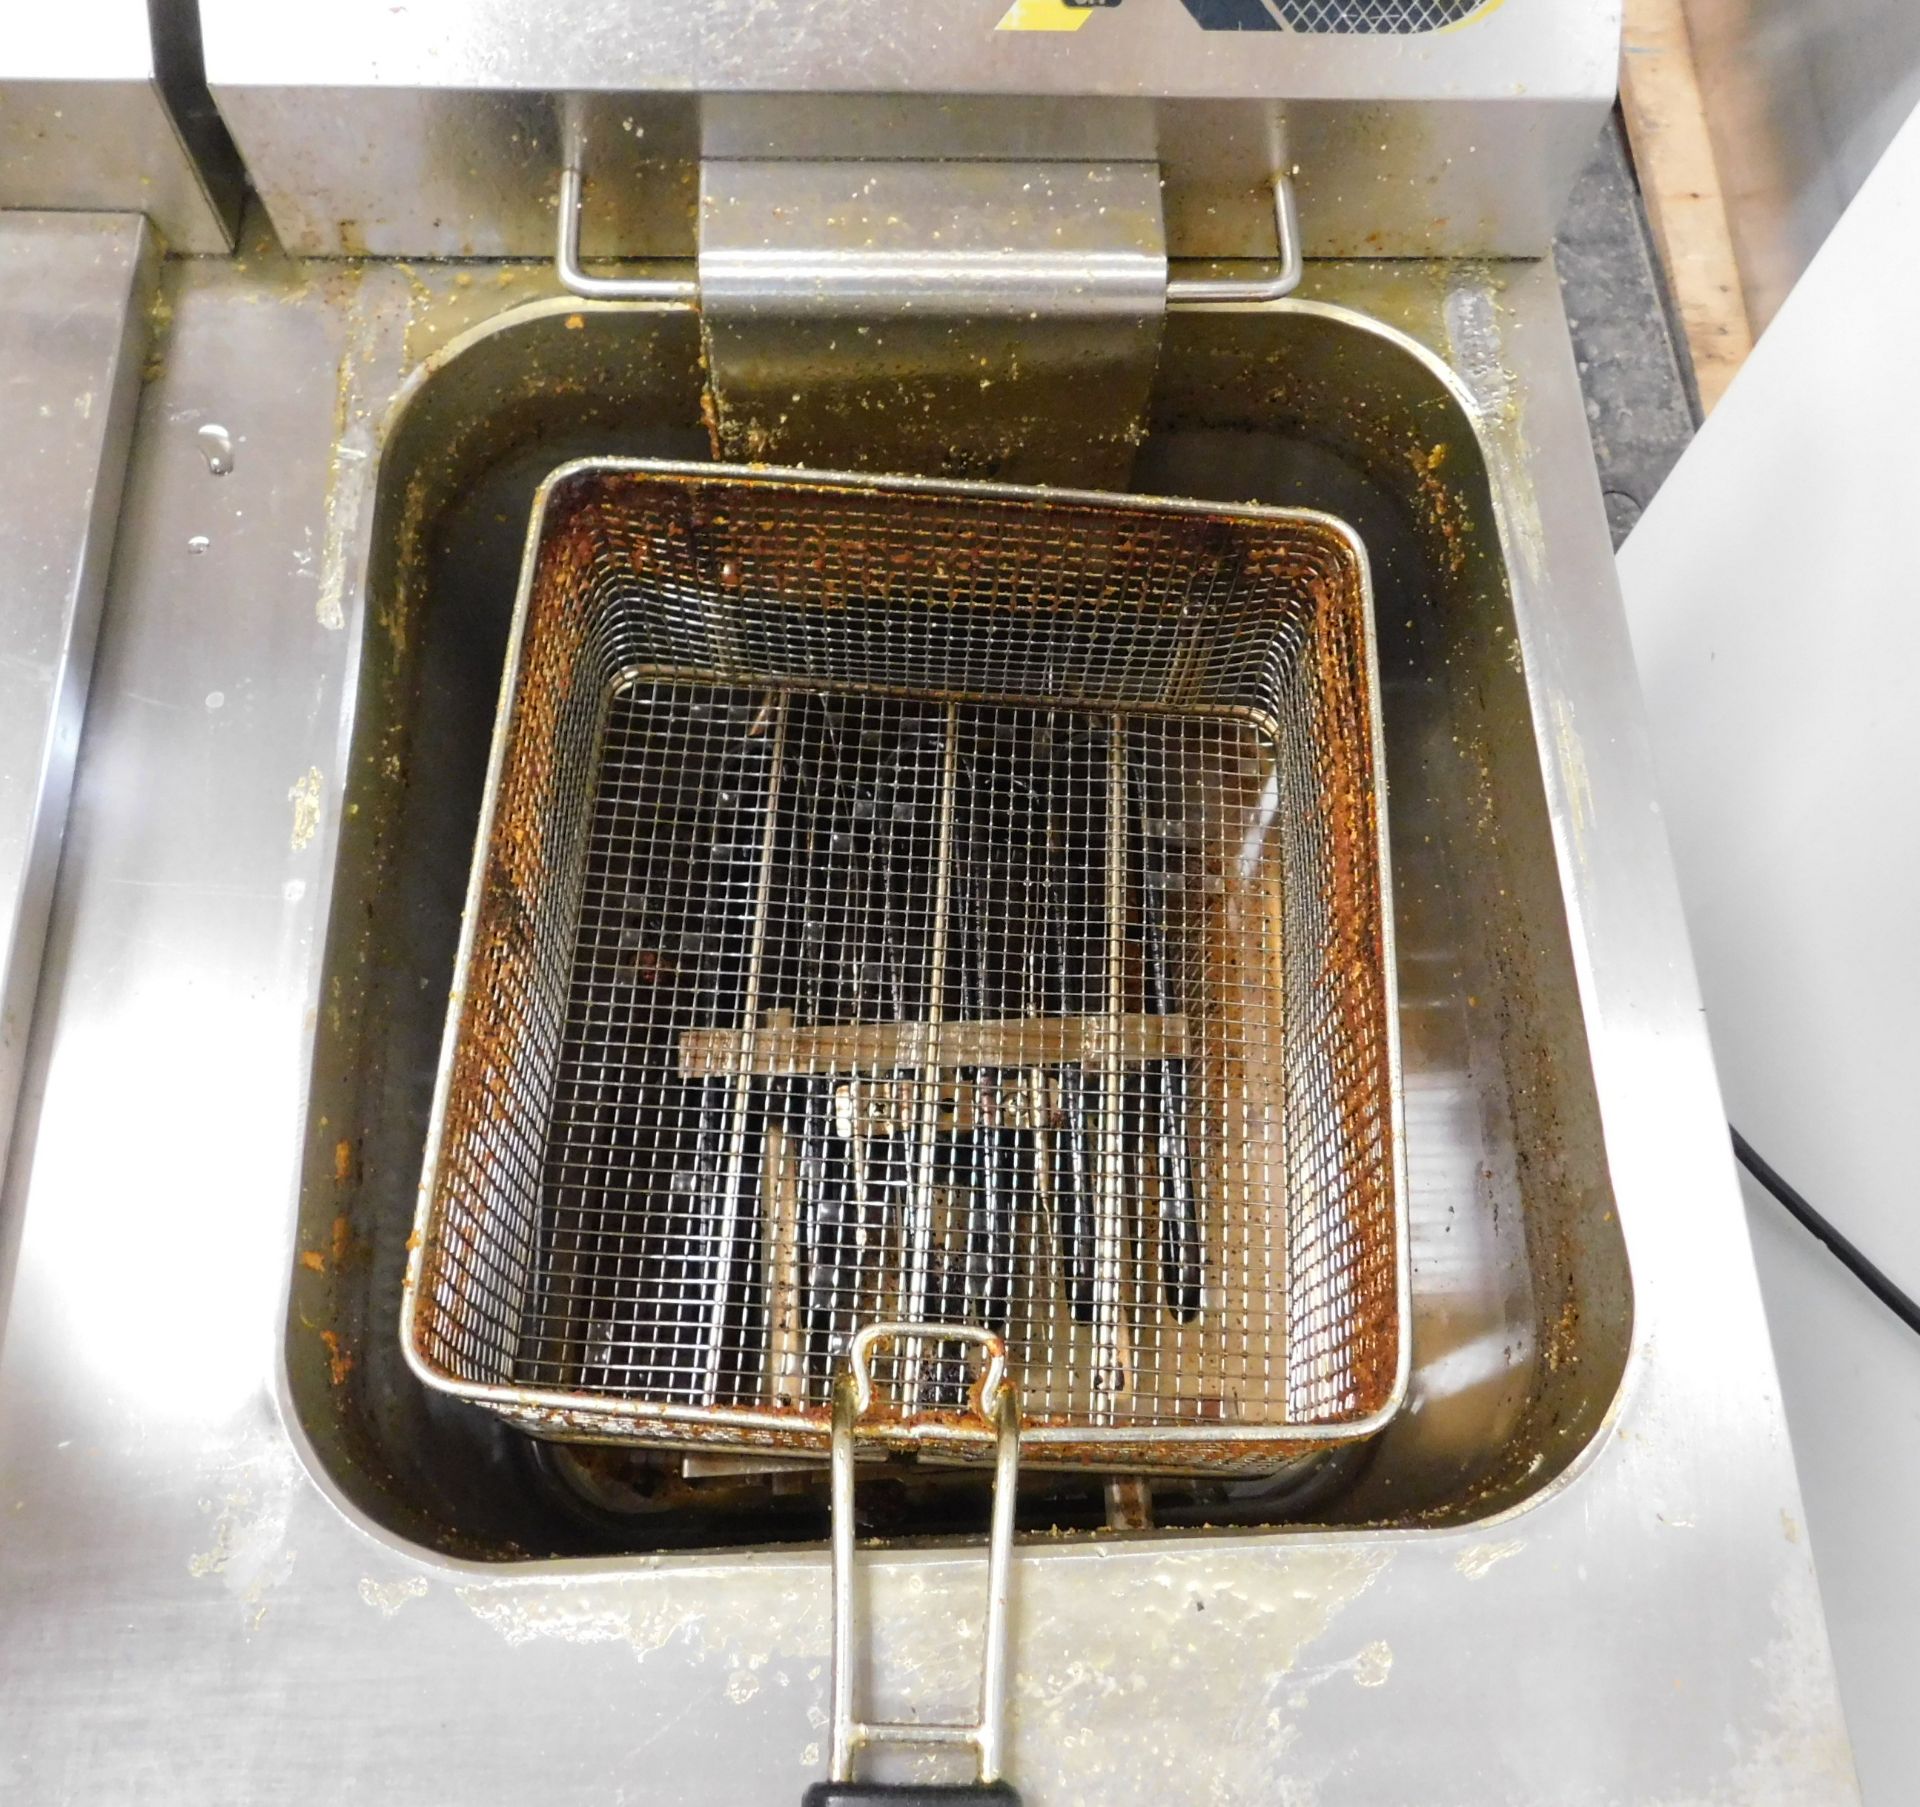 Adexa EF-162VC Double Deep Fat Electric Fryer (Location Brentwood. Please Refer to General Notes) - Image 3 of 6